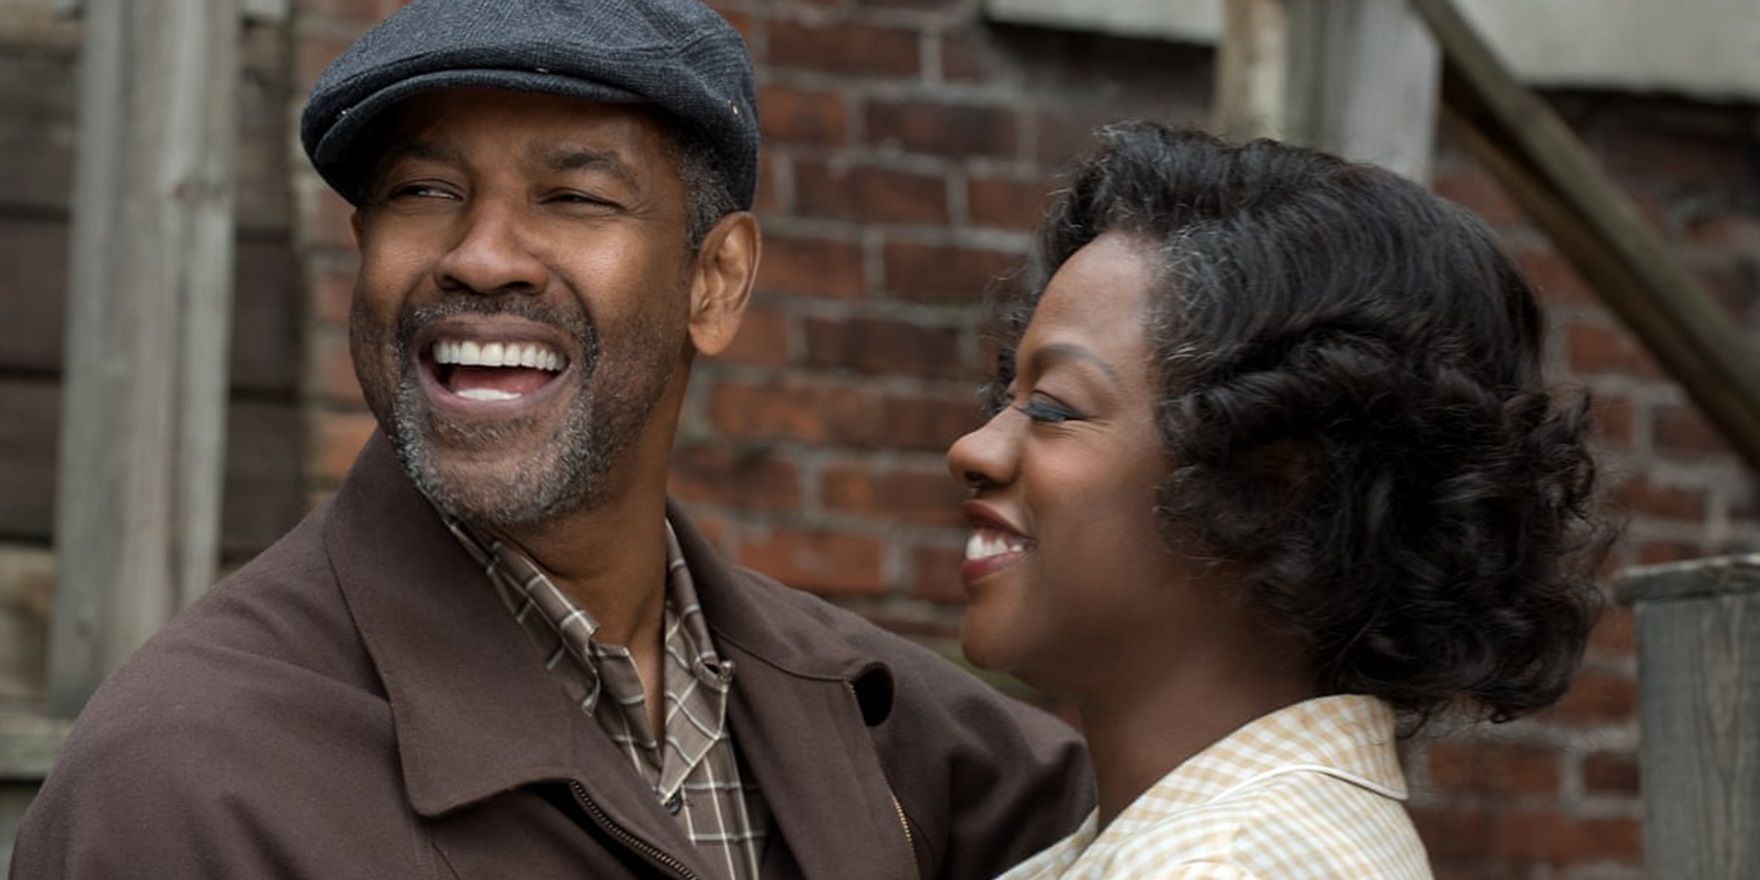 Troy and Rose smiling together in Fences